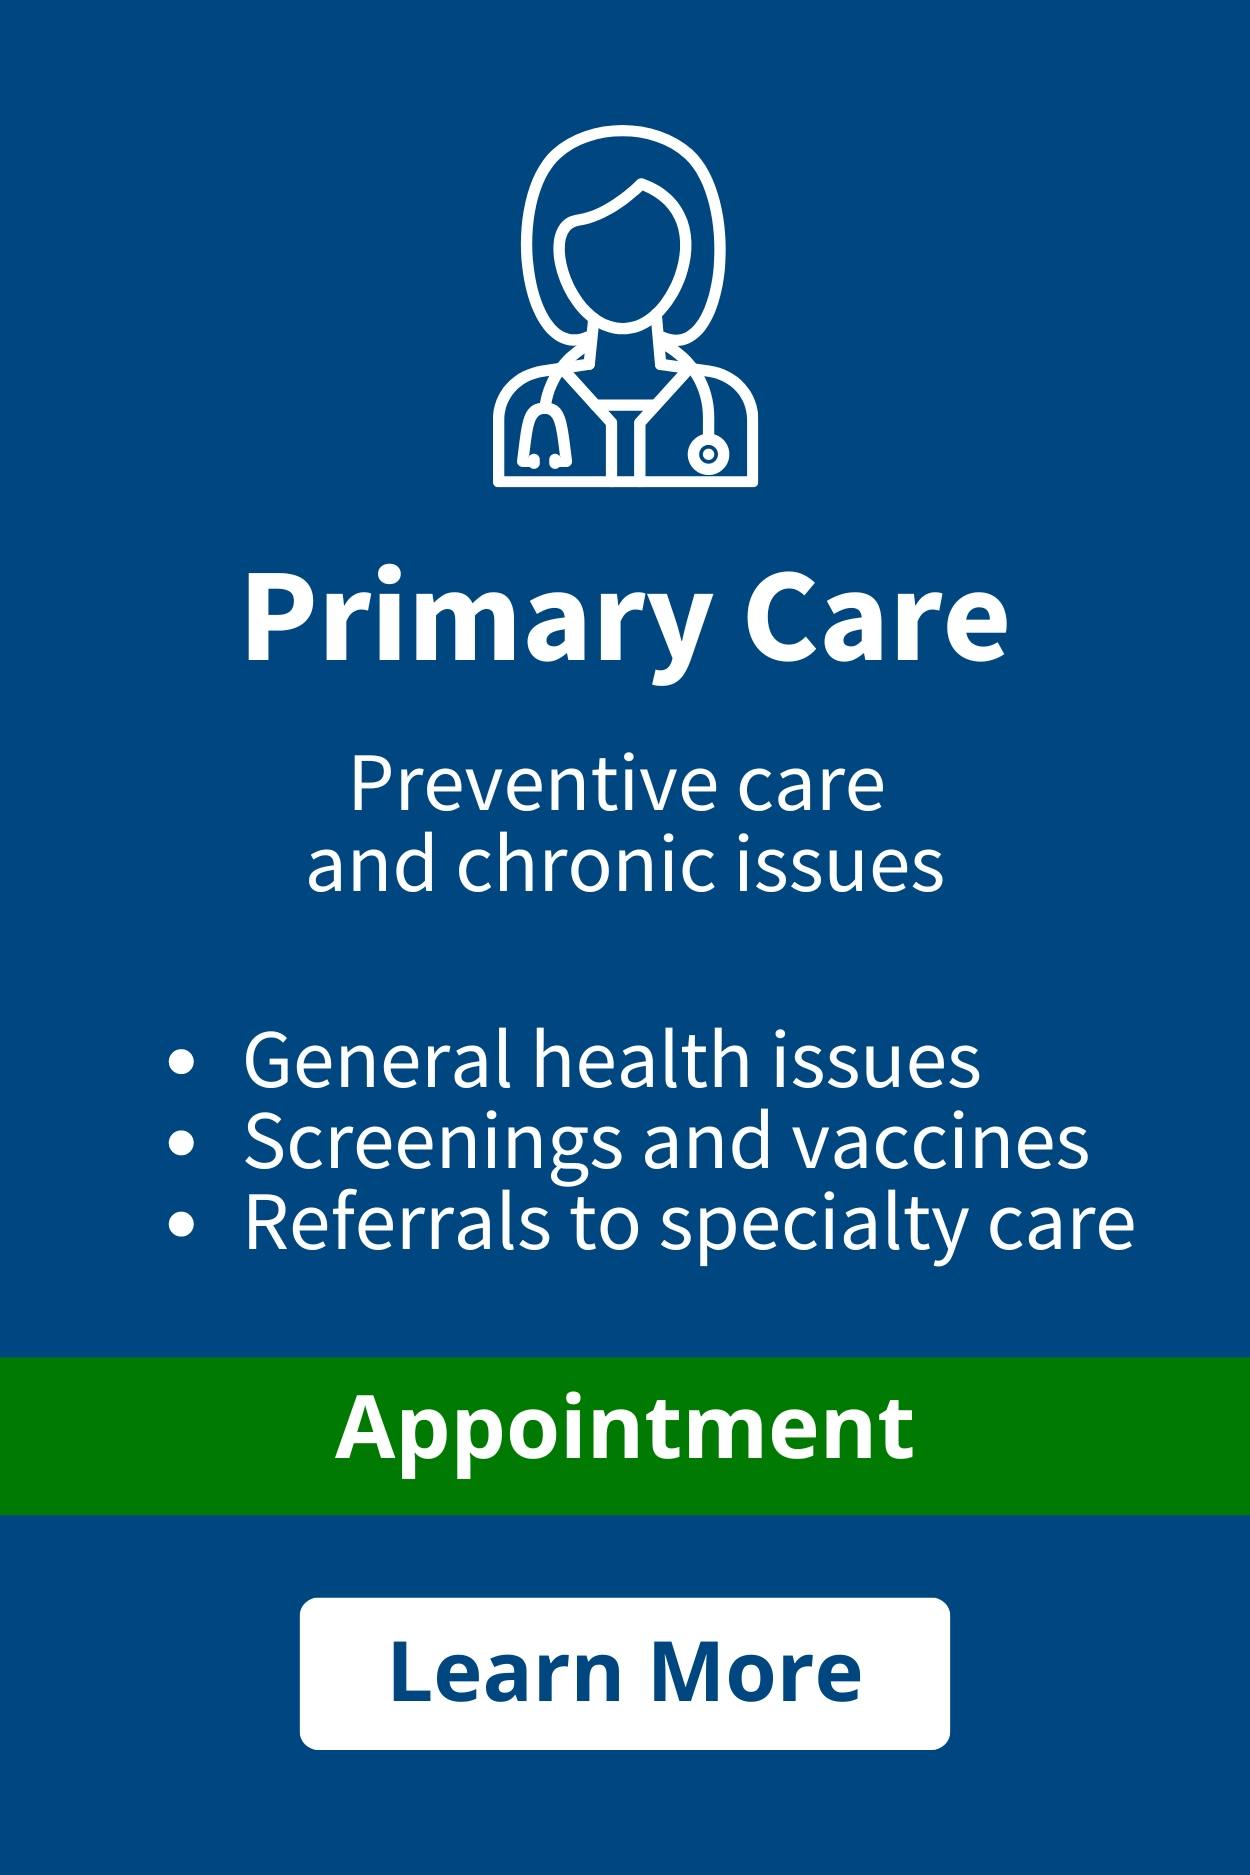 Blue graphic with text reading "Primary Care. Preventive care and chronic issues." Bullet points read: "General health issues. Screenings and vaccines. Referrals to specialty care." Light blue bar reads "Appointment." Button reads "Learn More"